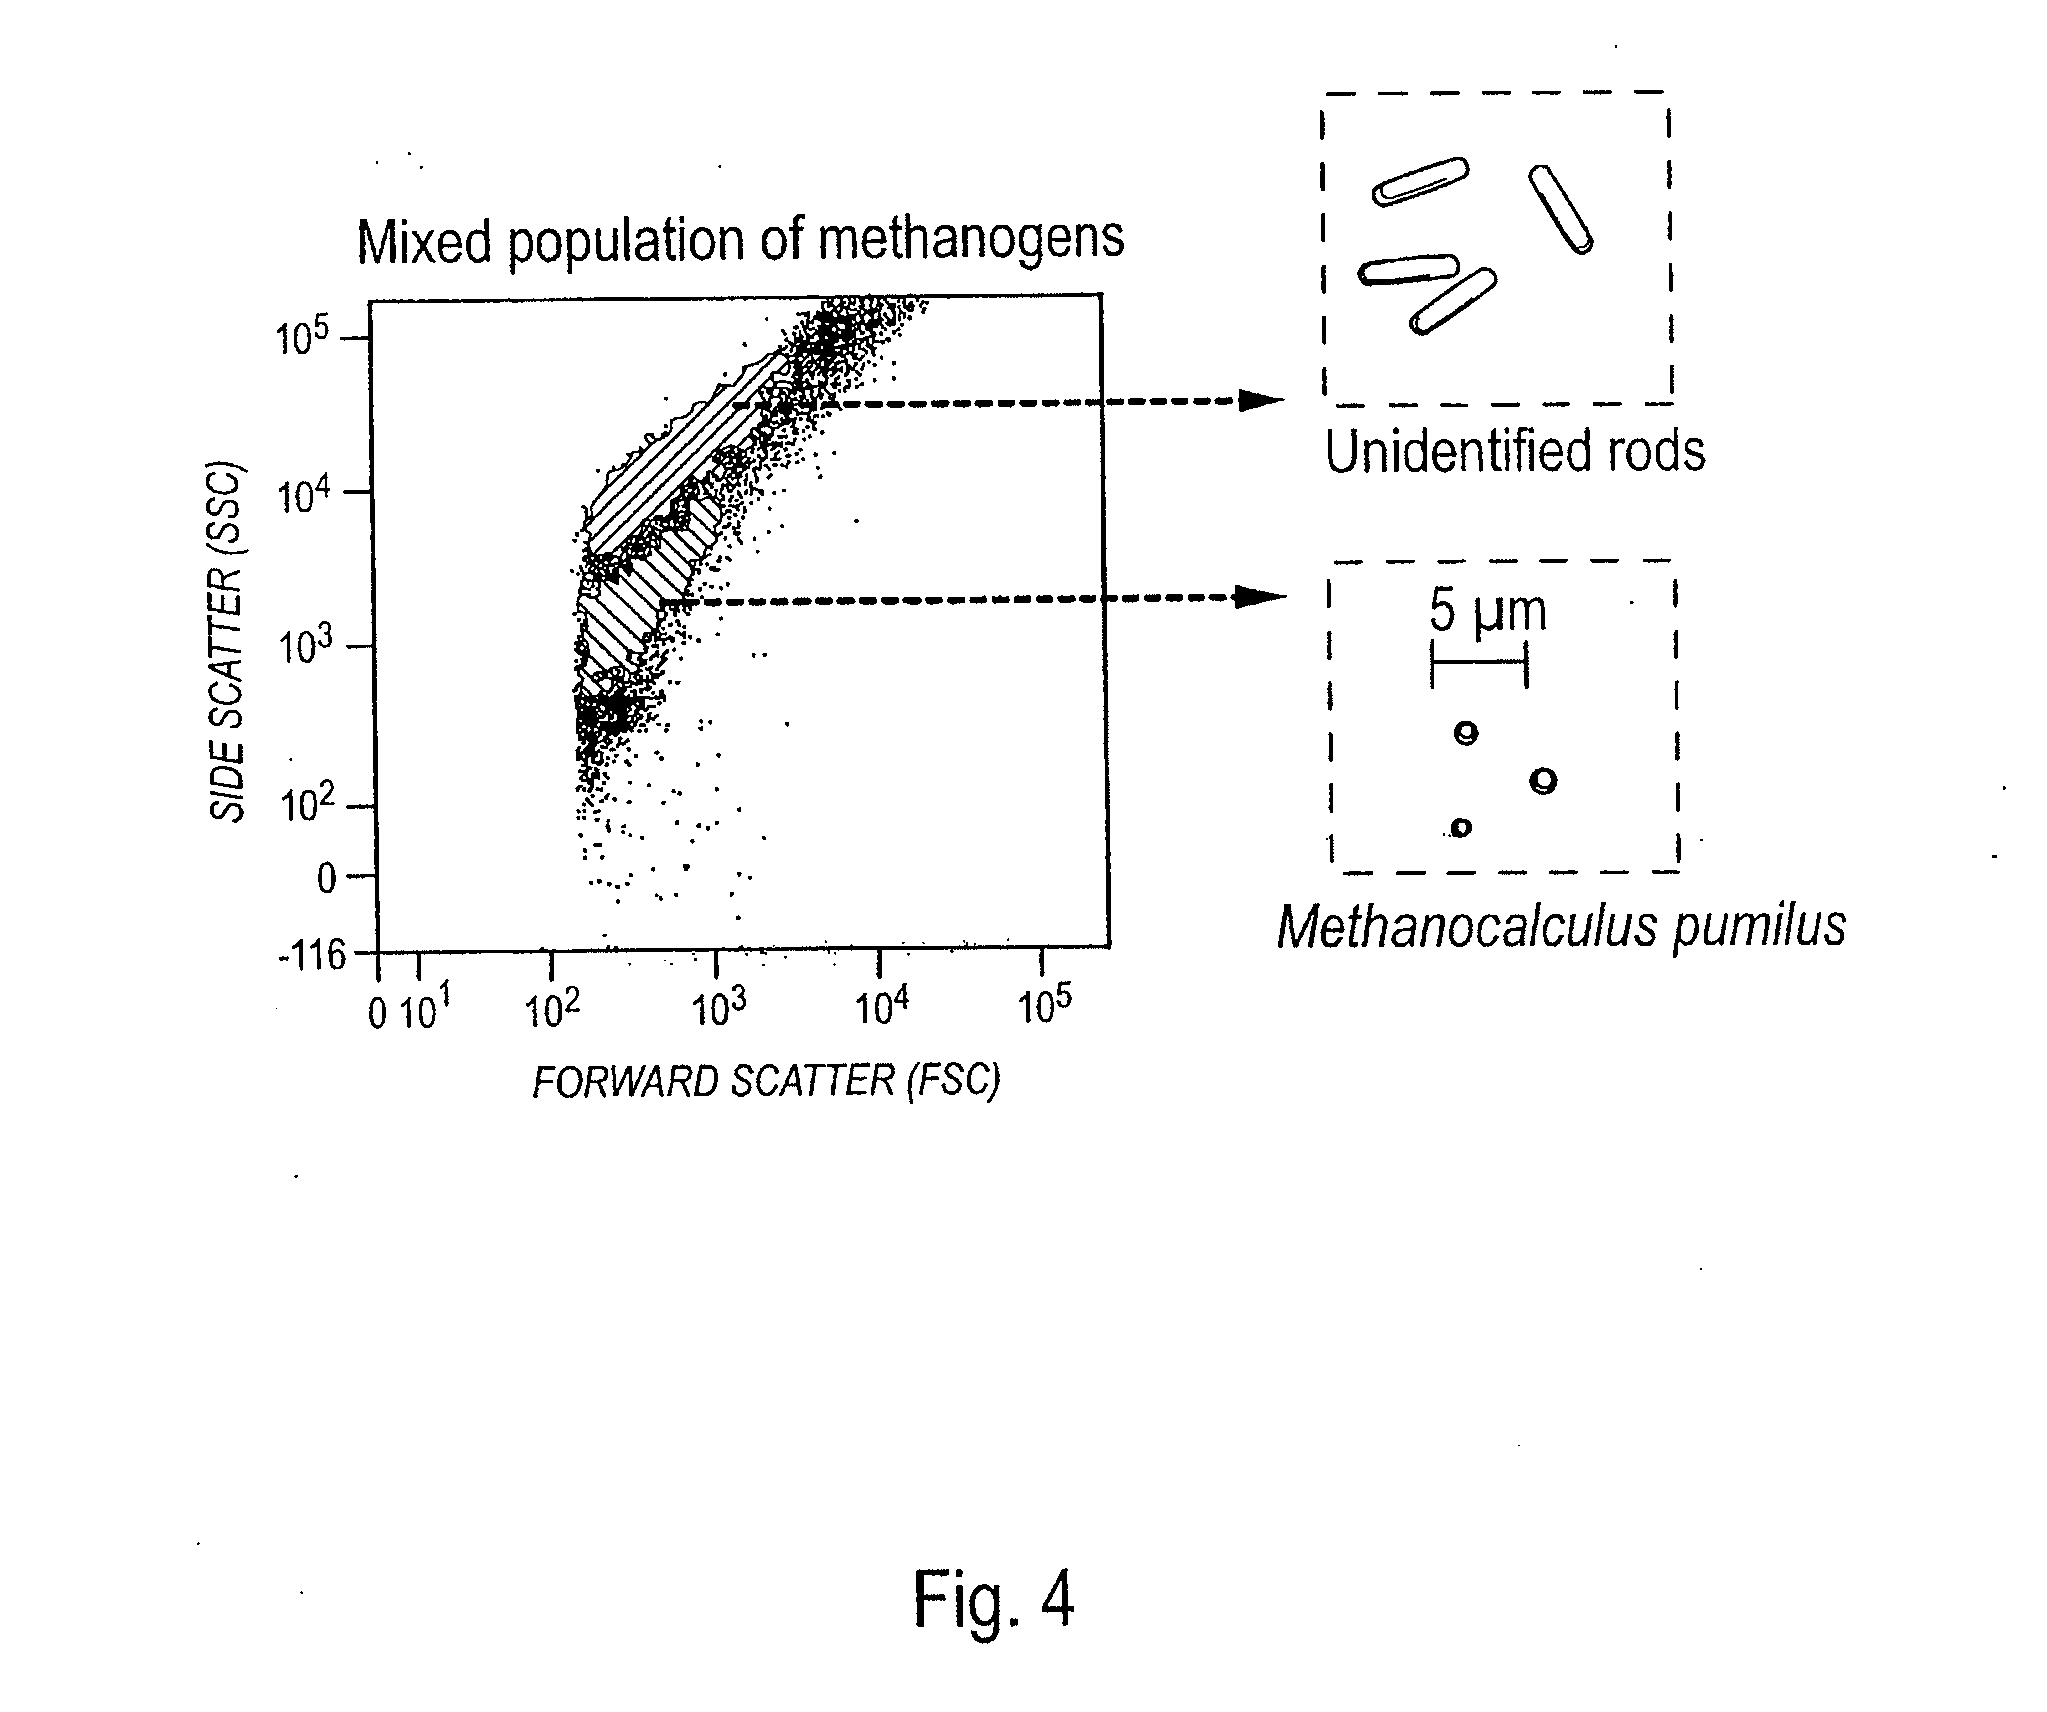 System and methods for anaerobic environmental microbial compartmentalized cultivation